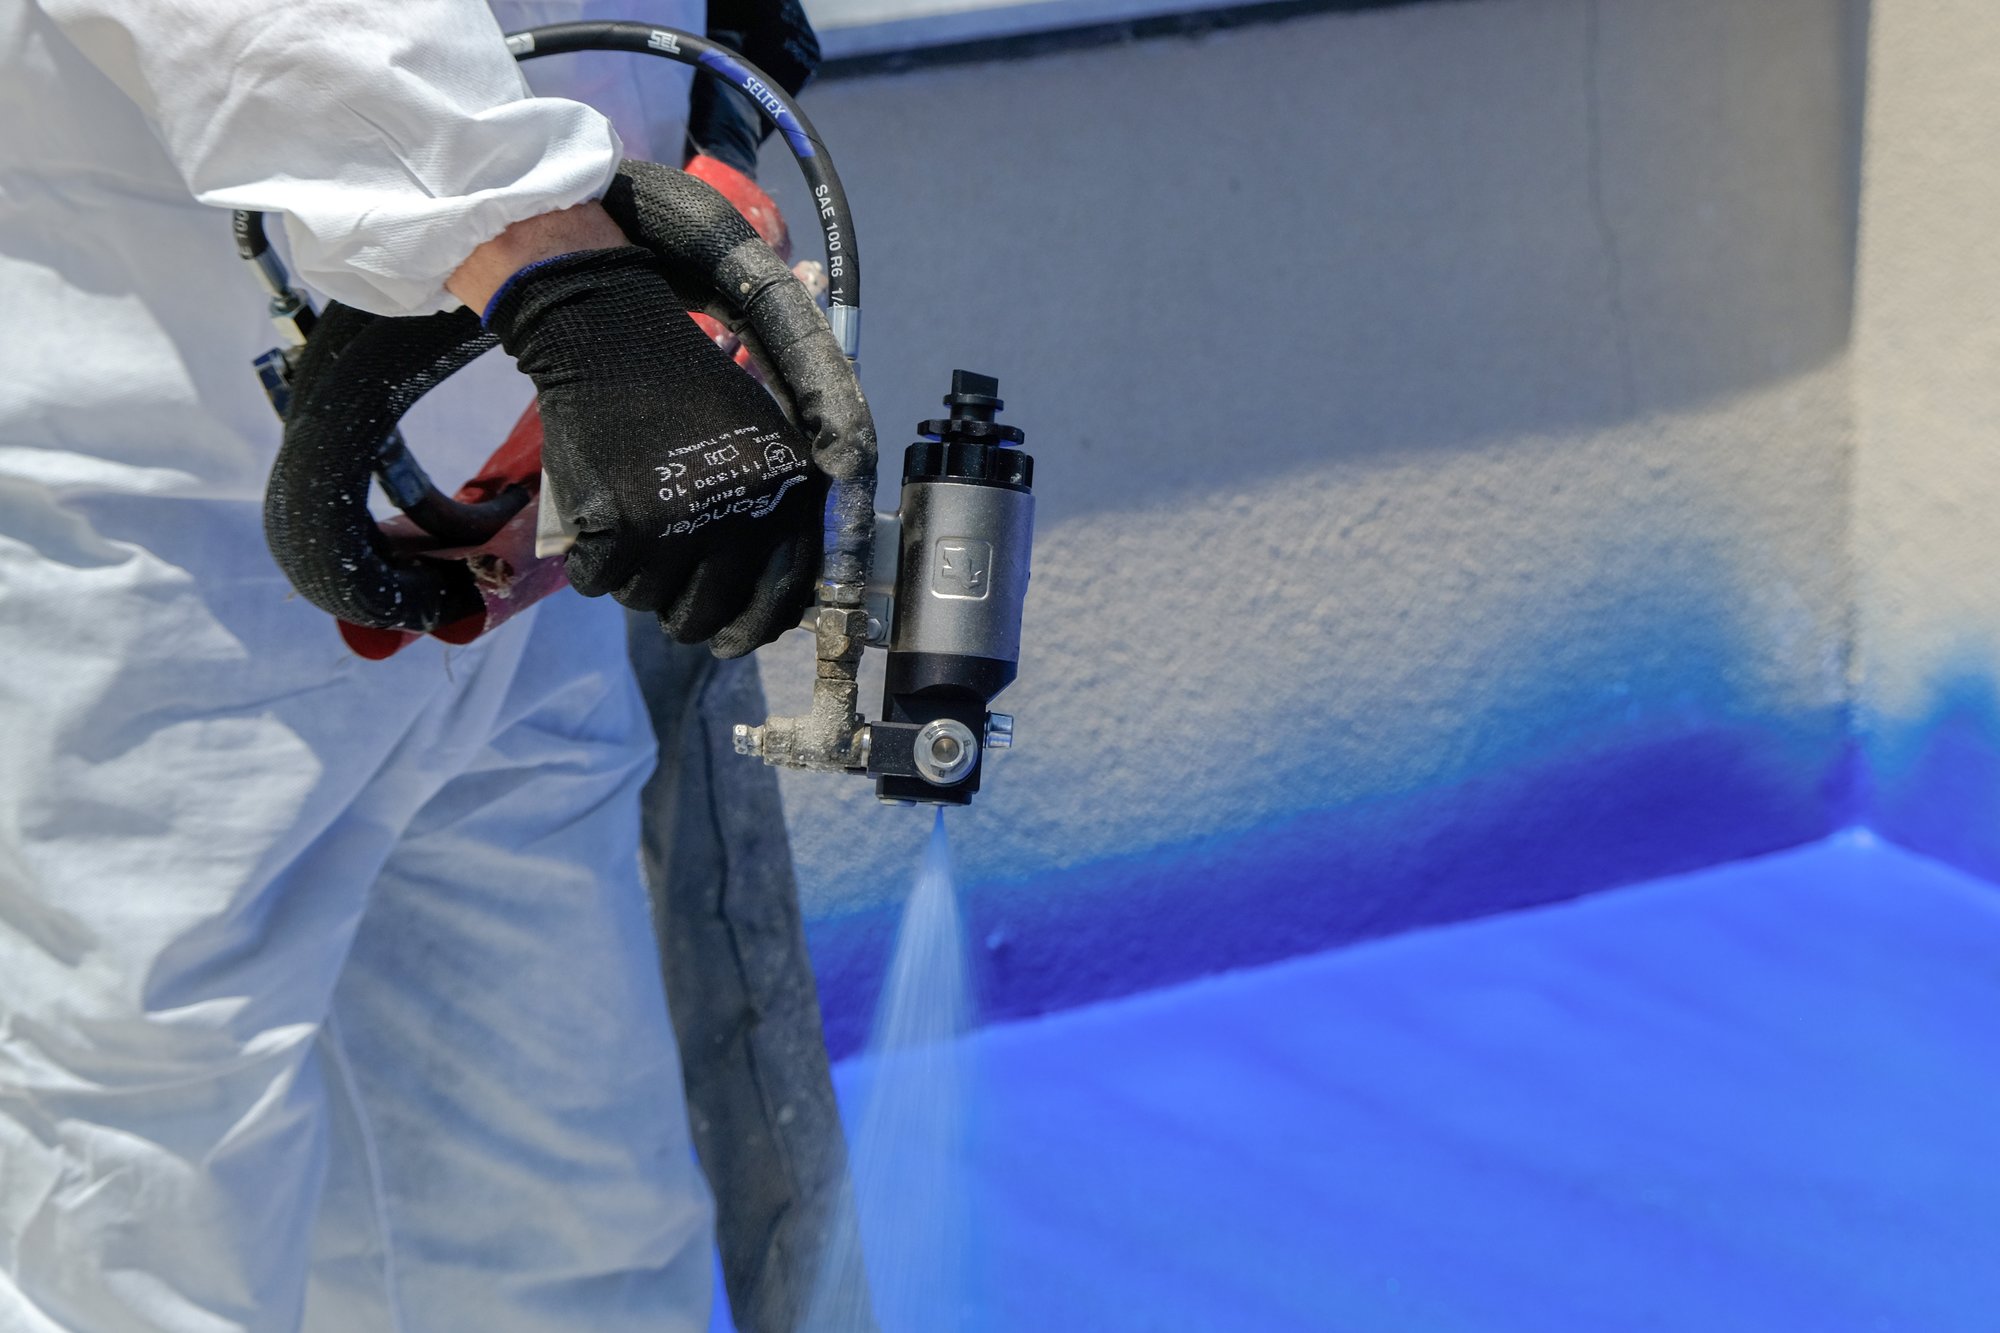 A close up of a black gloved hand holding a sprayer emmitting a blue substance